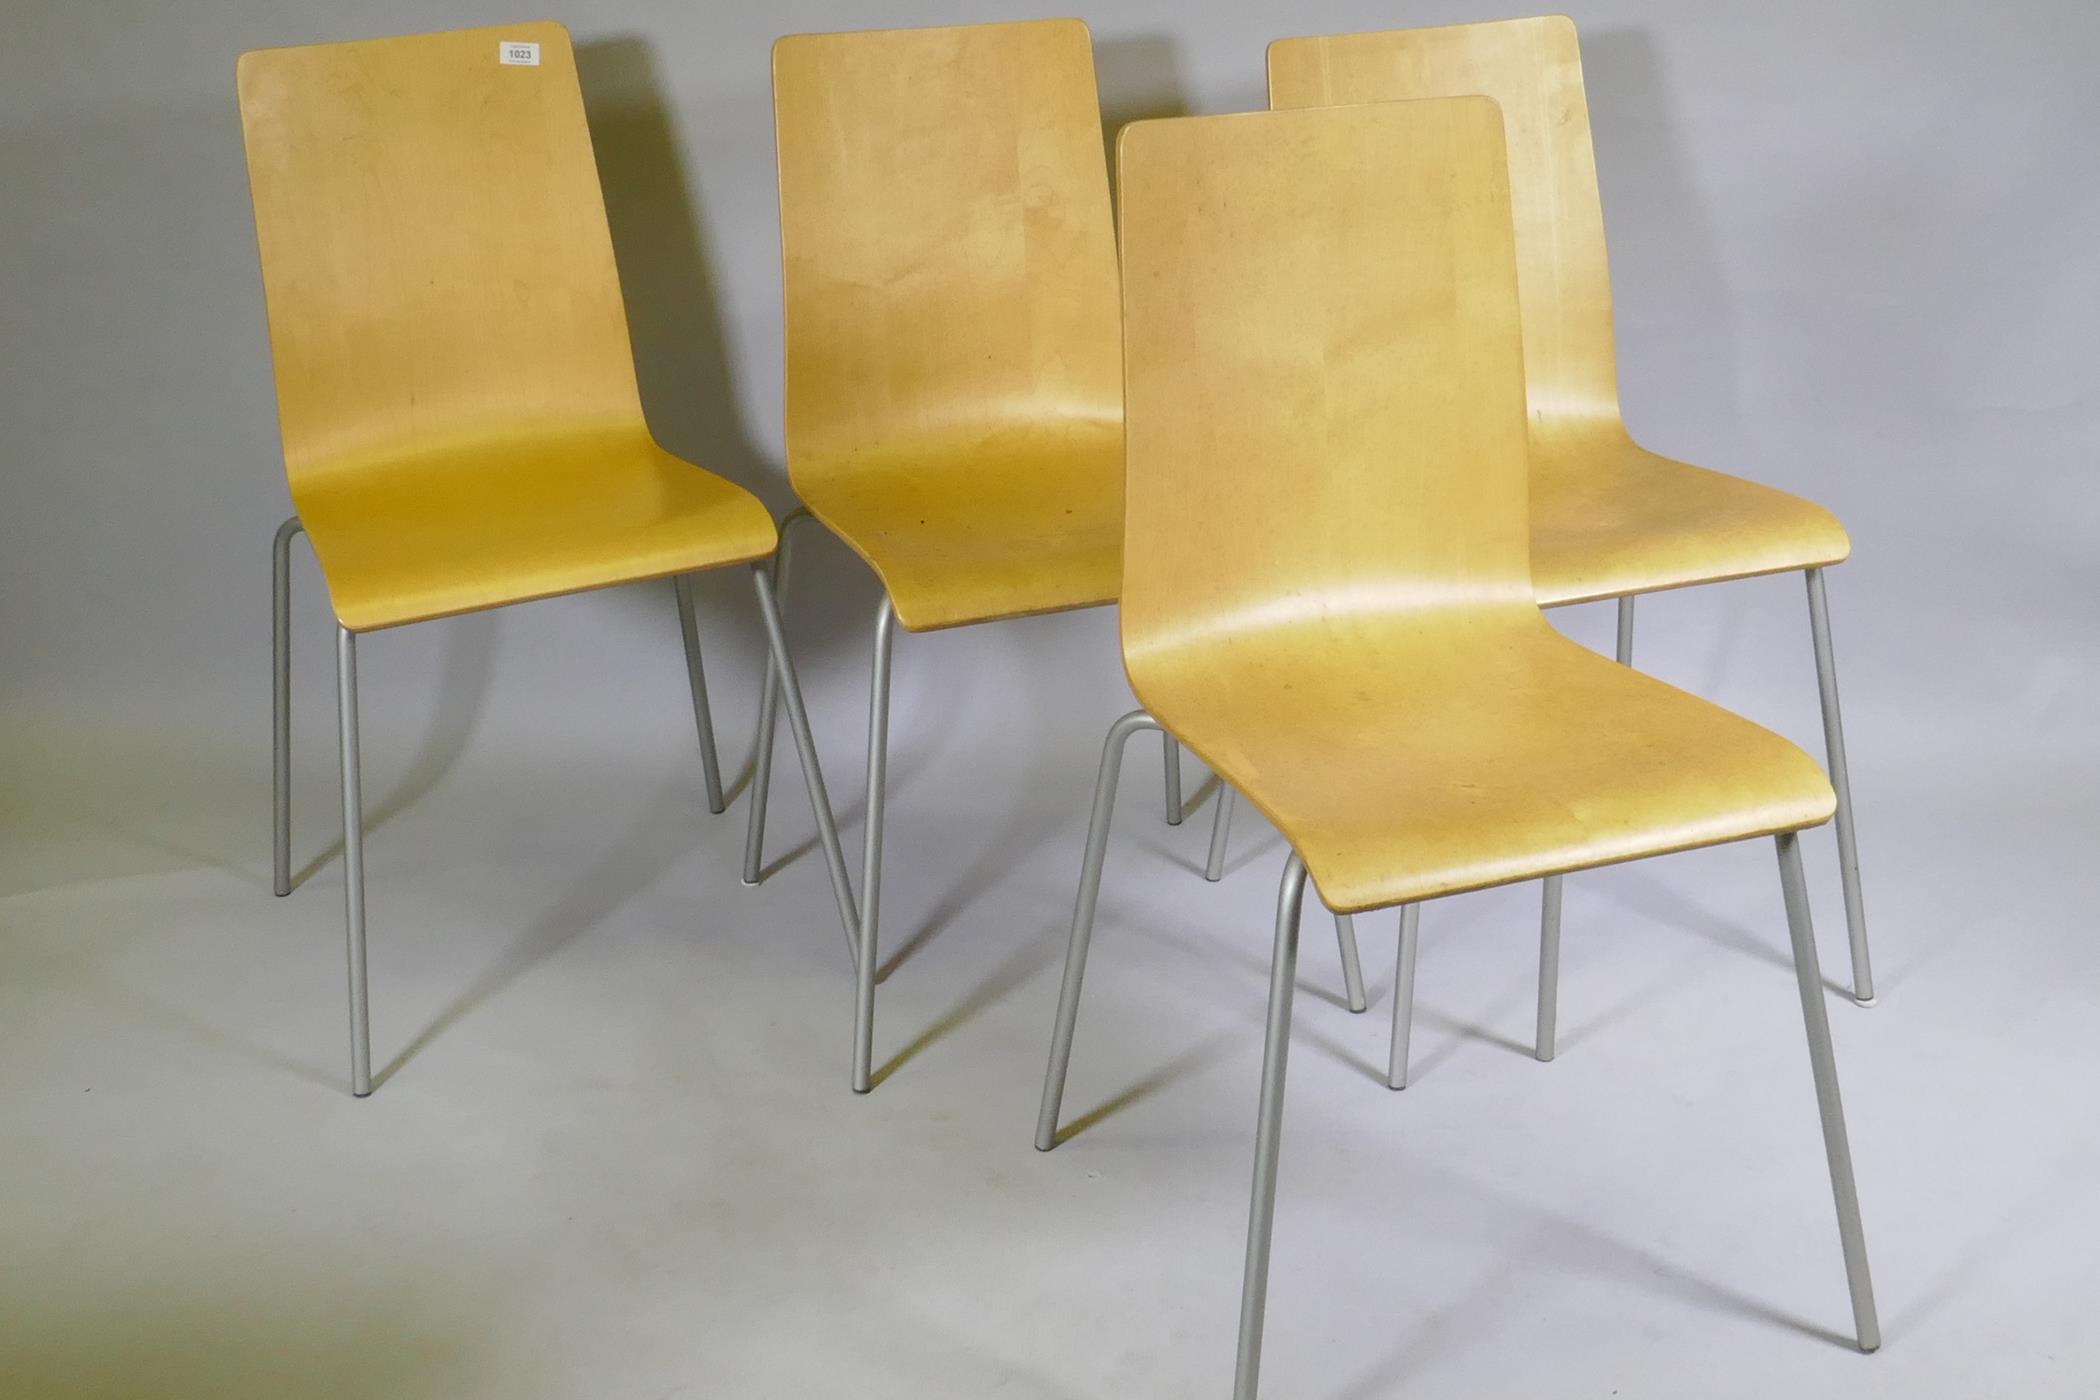 A set of four contemporary stacking bent plywood chairs in birchwood veneer